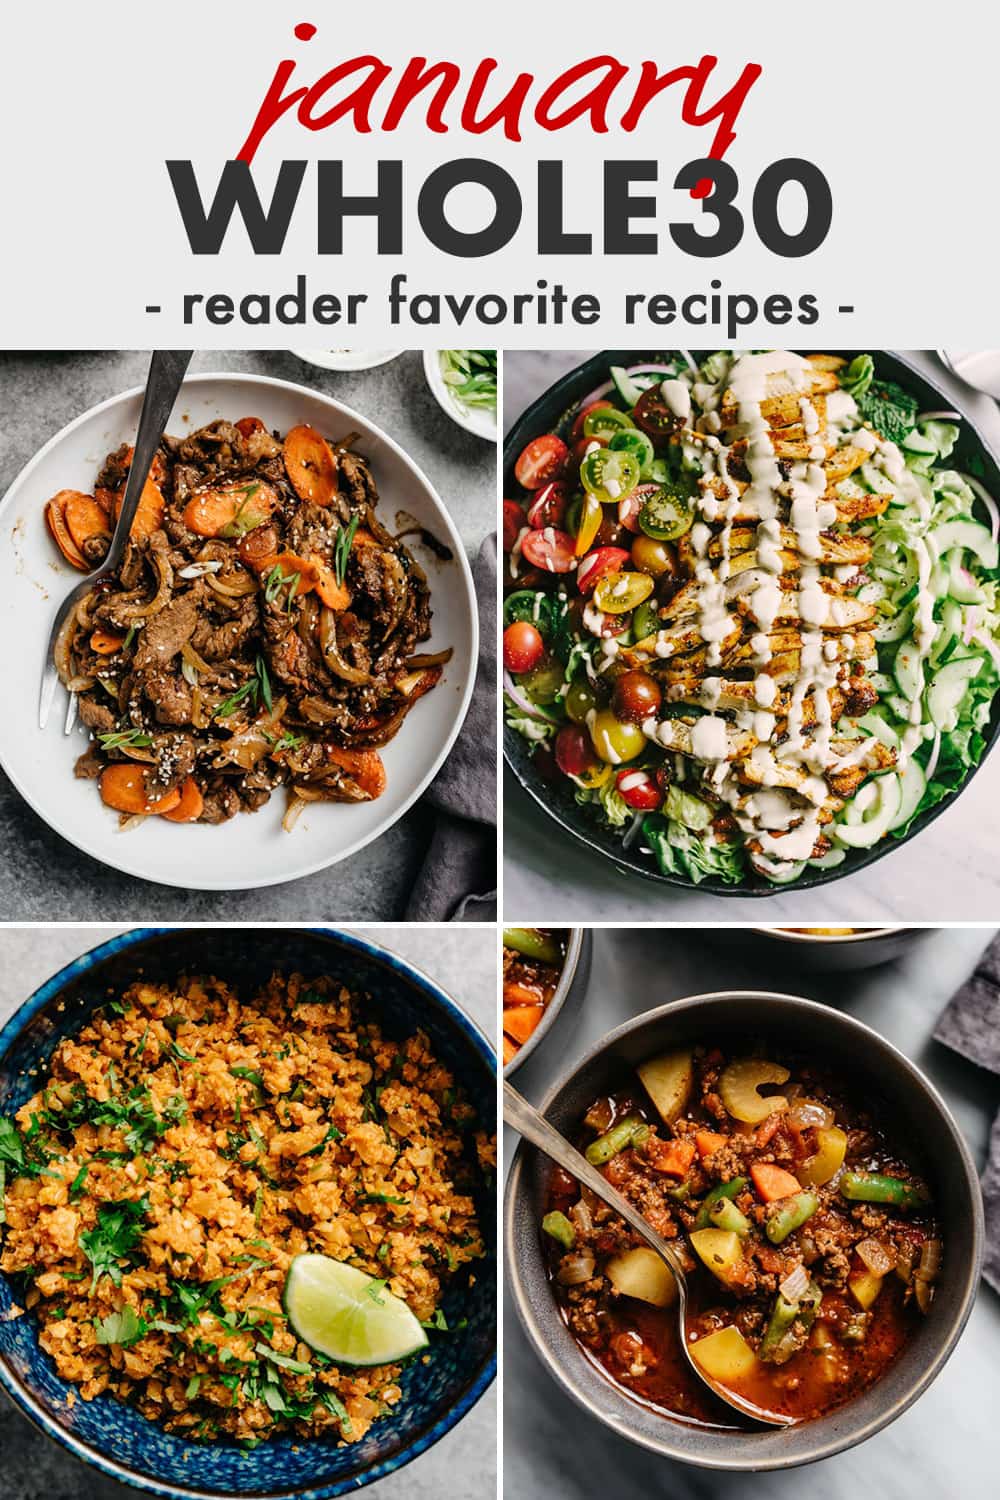 Pinterest collage for a January Whole30 recipe round-up.